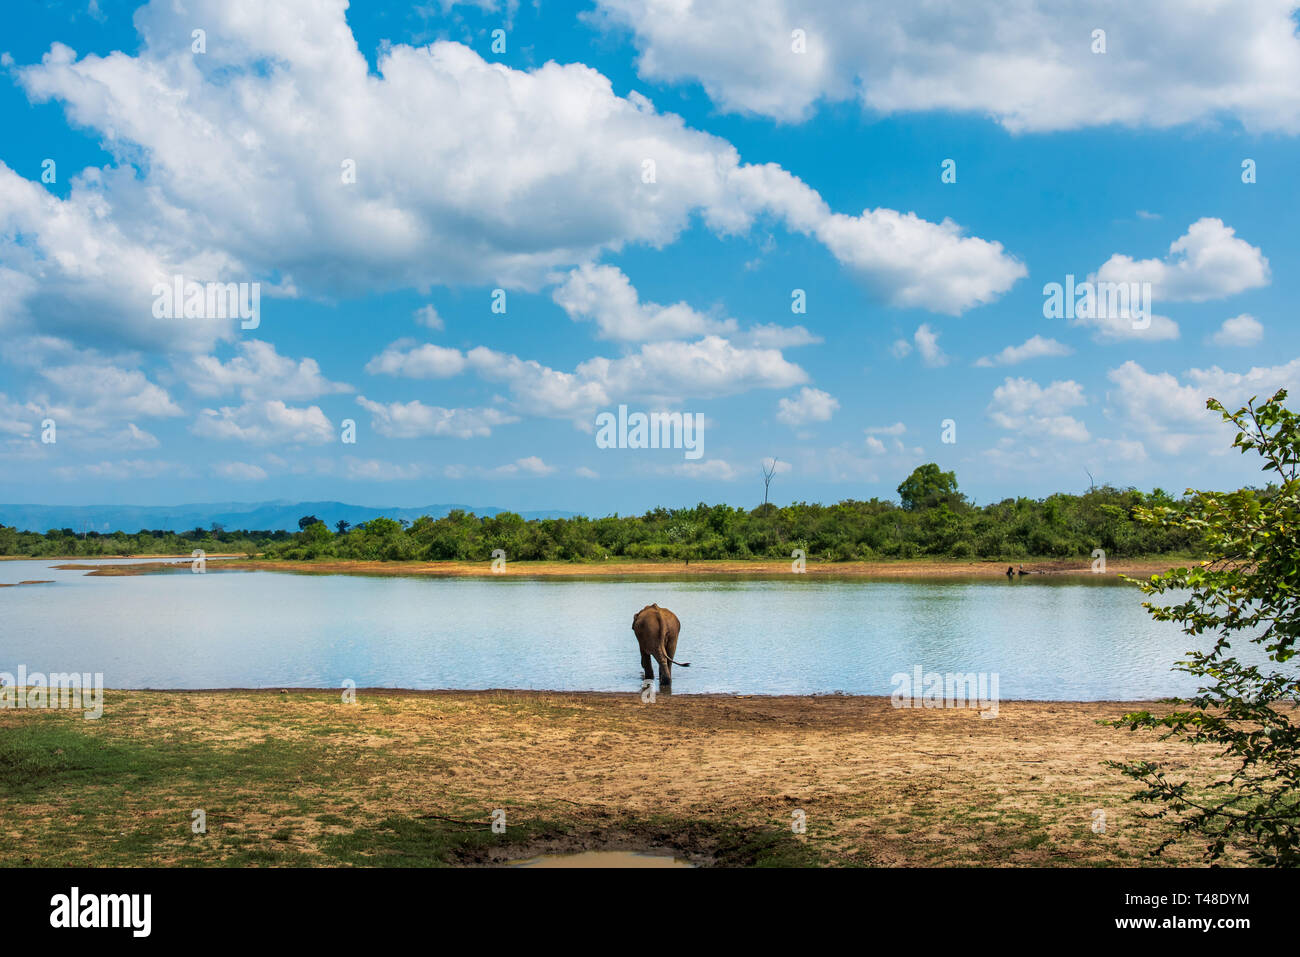 Lonely Asian elephant walking by the lake Stock Photo